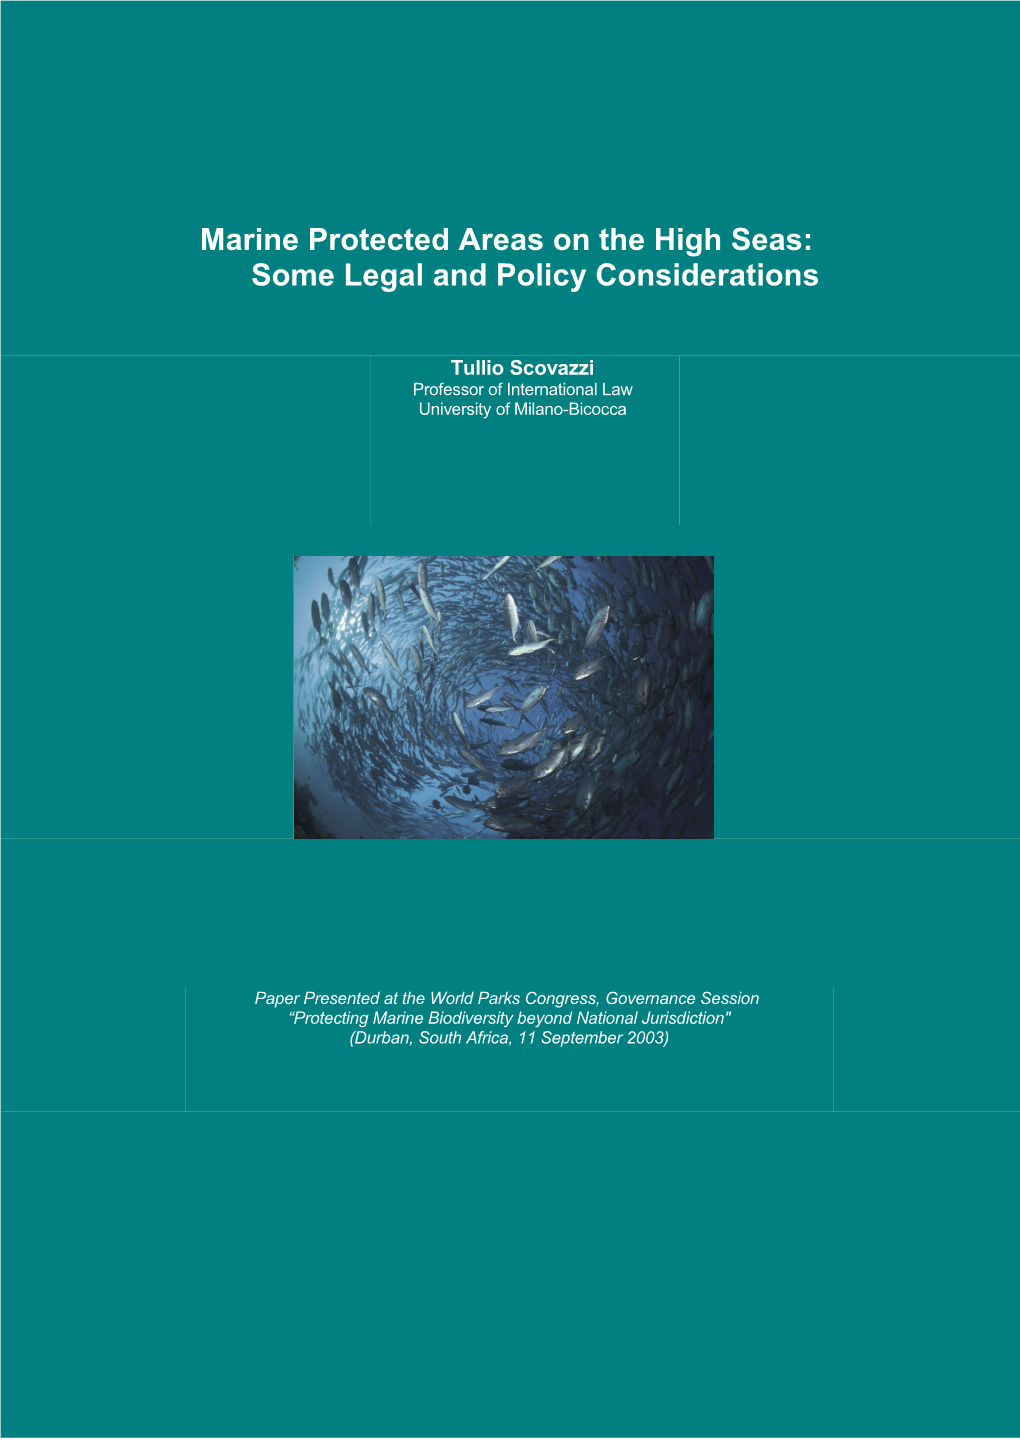 Marine Protected Areas on the High Seas: Some Legal and Policy Considerations